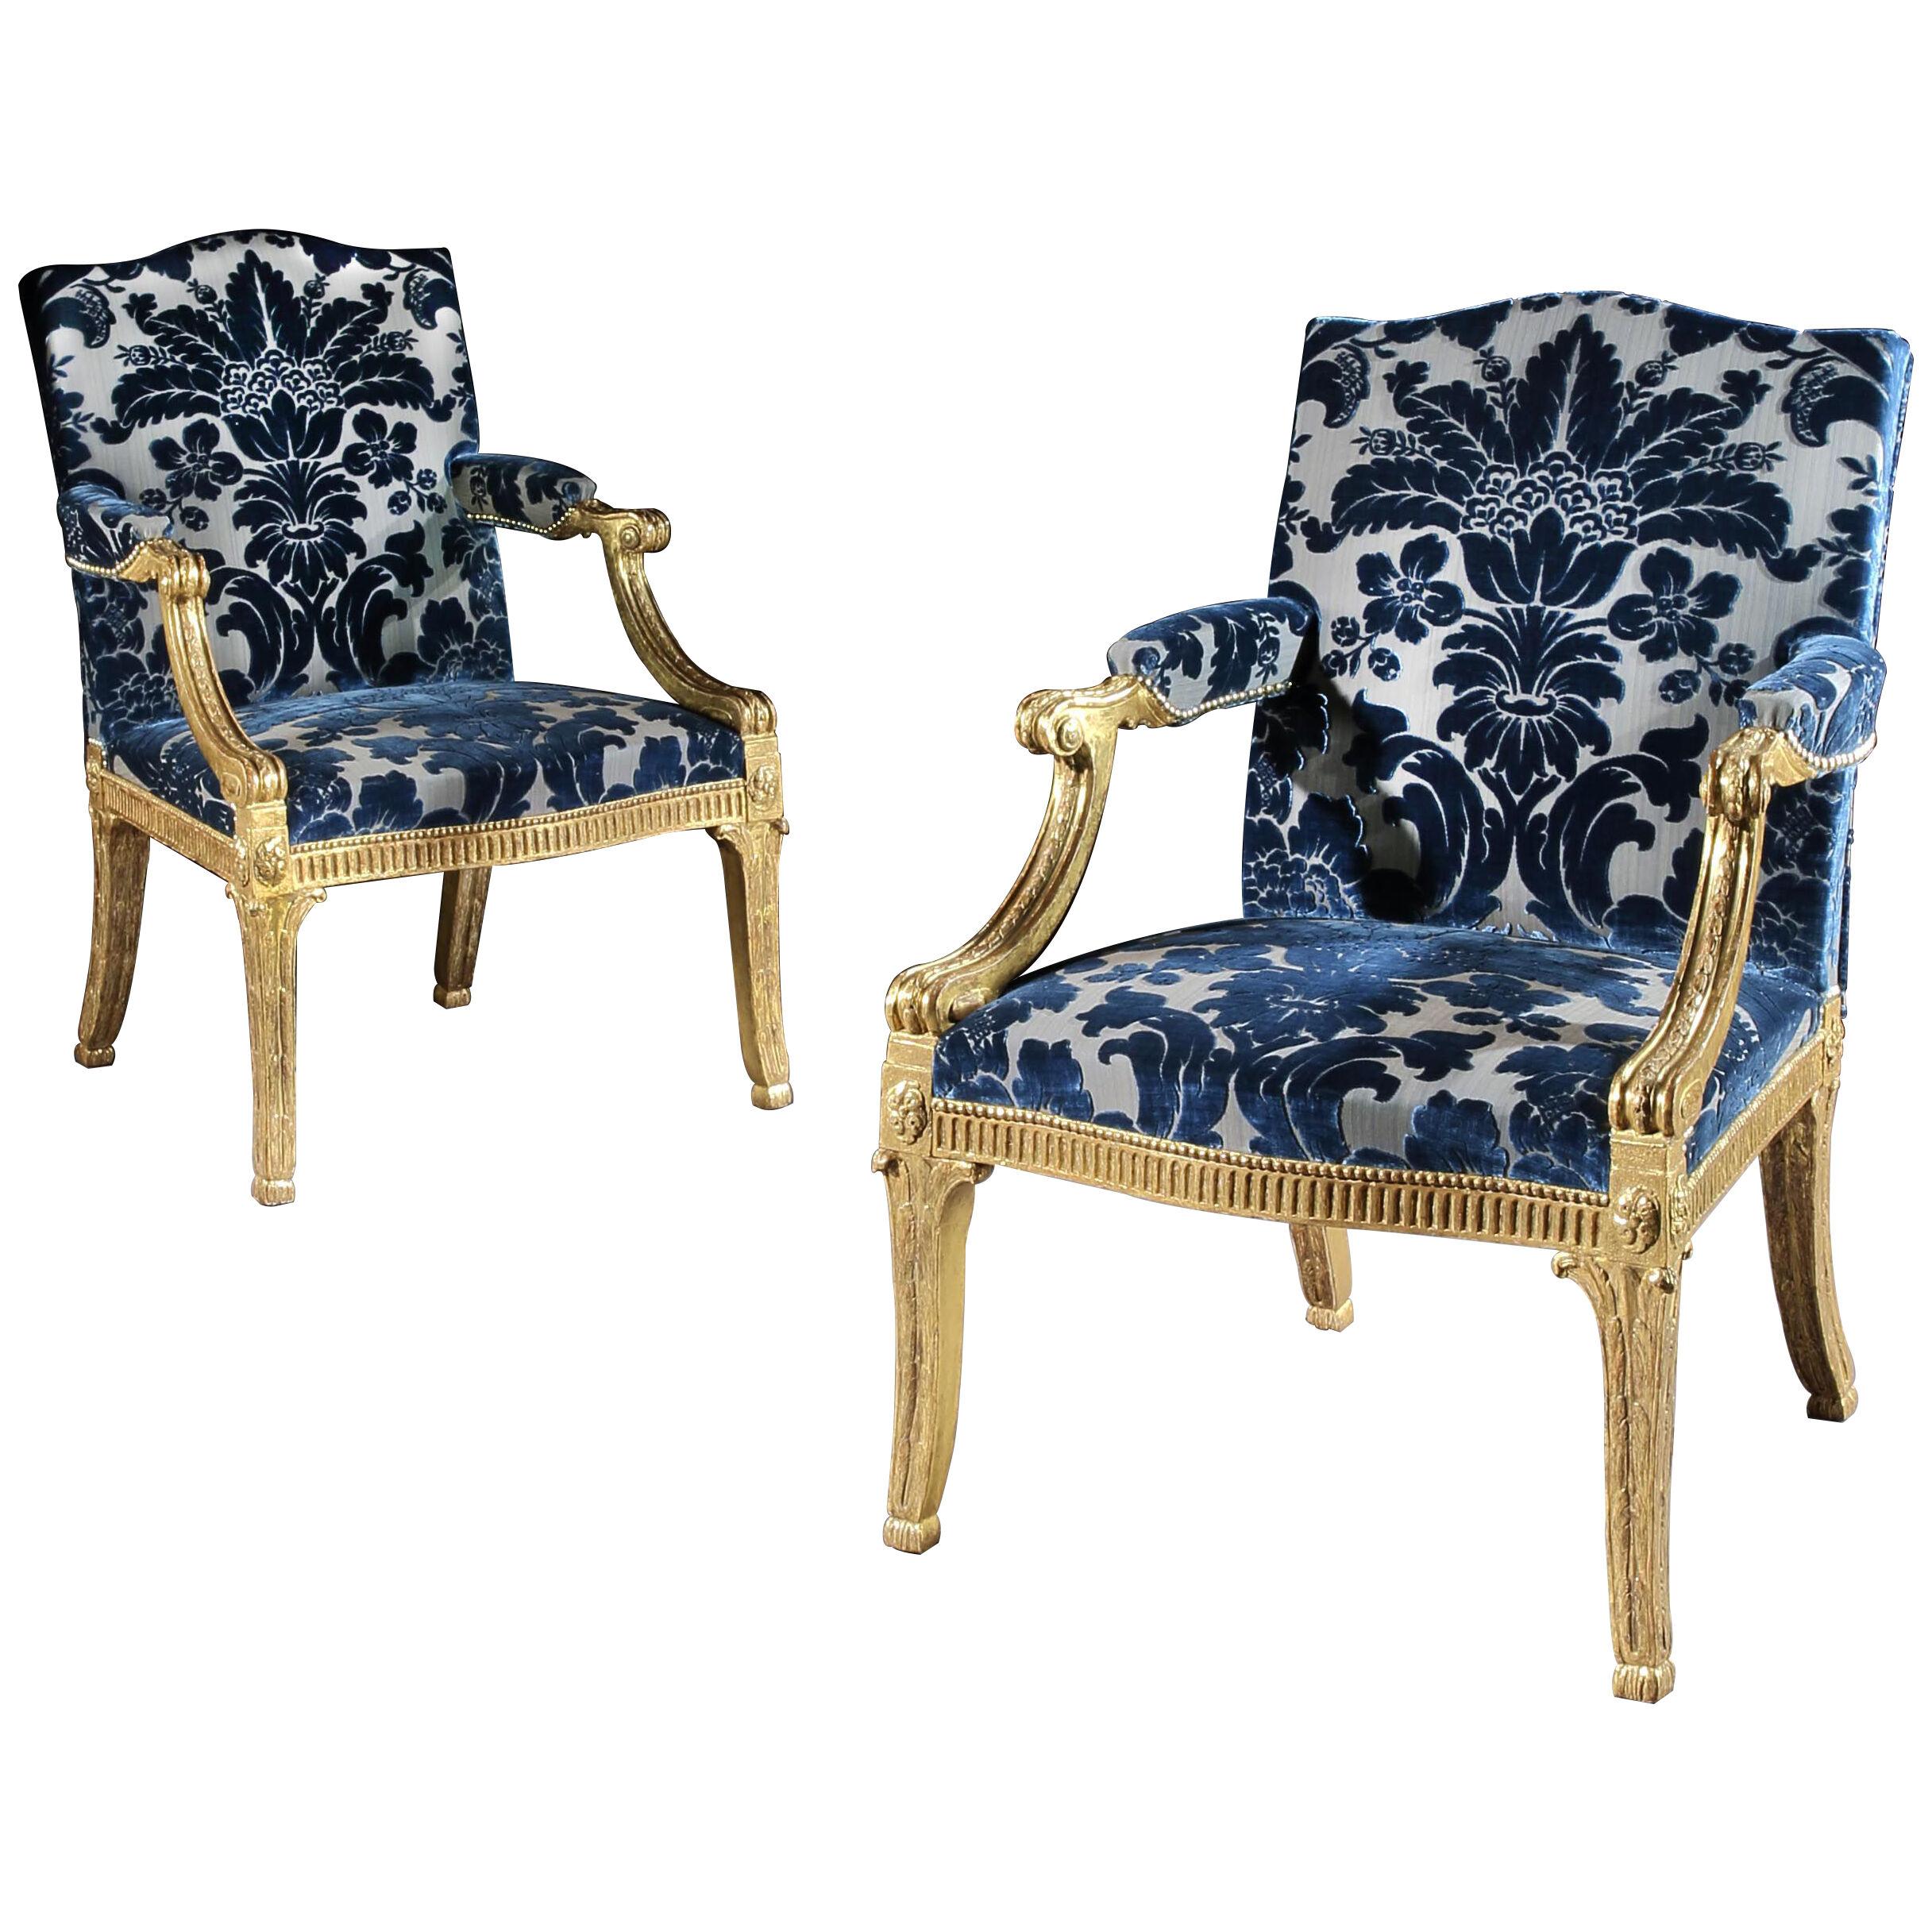 A Pair of George III Giltwood Armchairs attributed to John Linnell